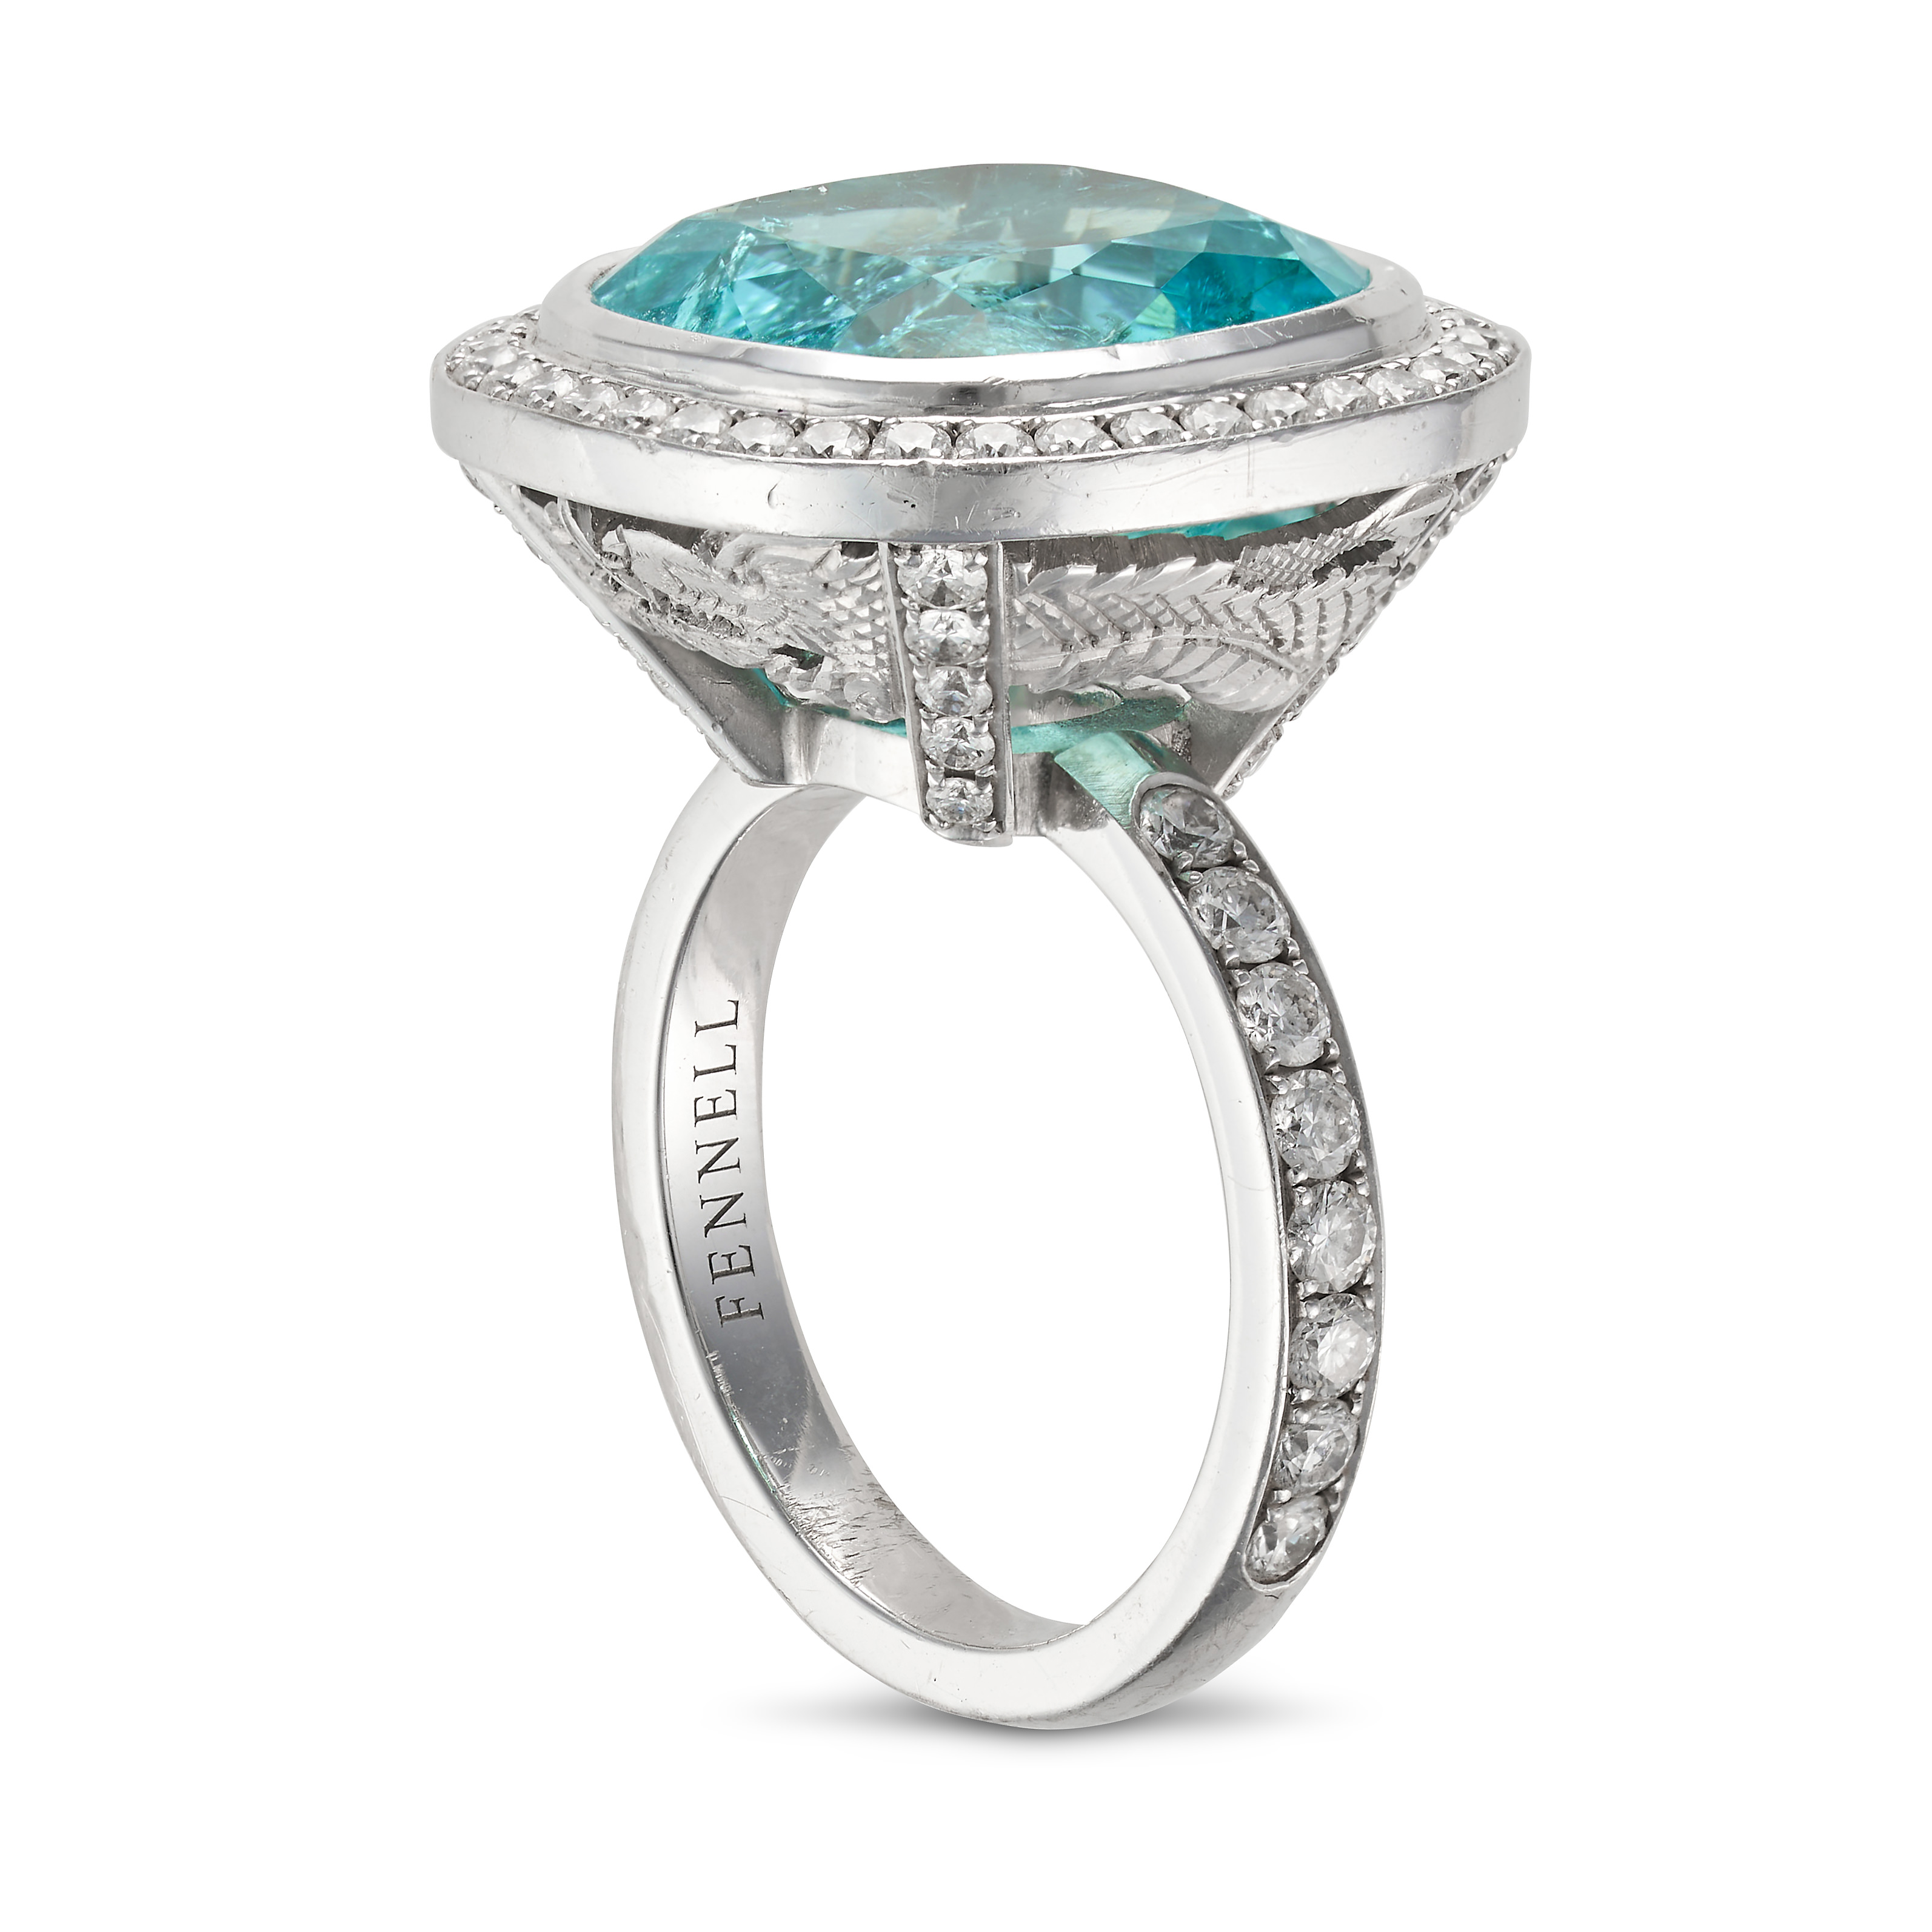 THEO FENNELL, A 11.43 CARAT PARAIBA TOURMALINE AND DIAMOND RING in 18ct white gold, set with a cu... - Image 2 of 3